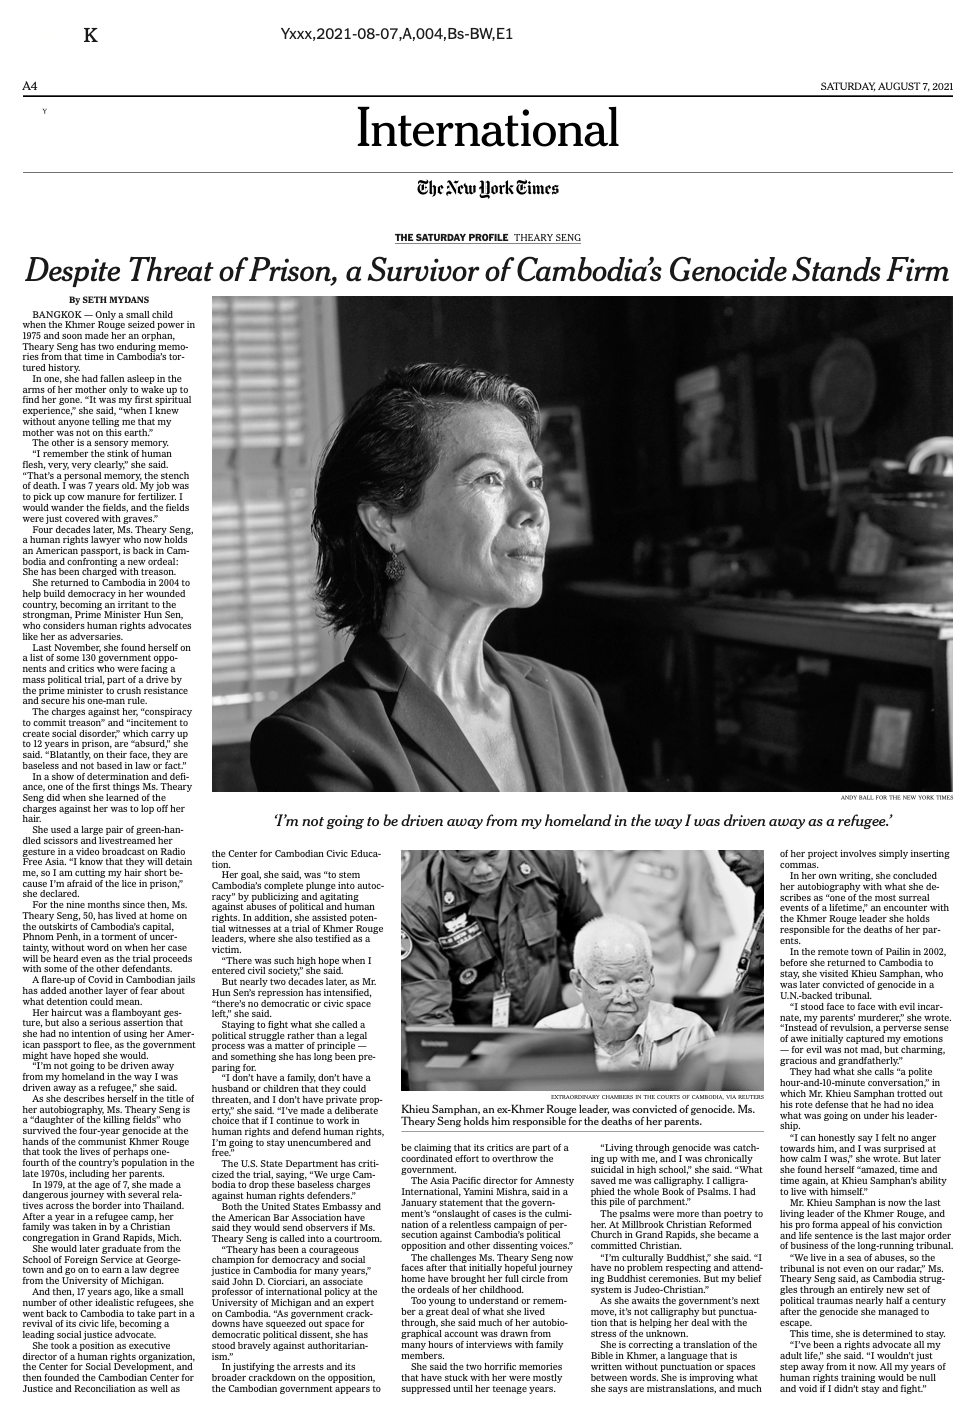 Theary Seng in Cambodia New York Times International sections.png